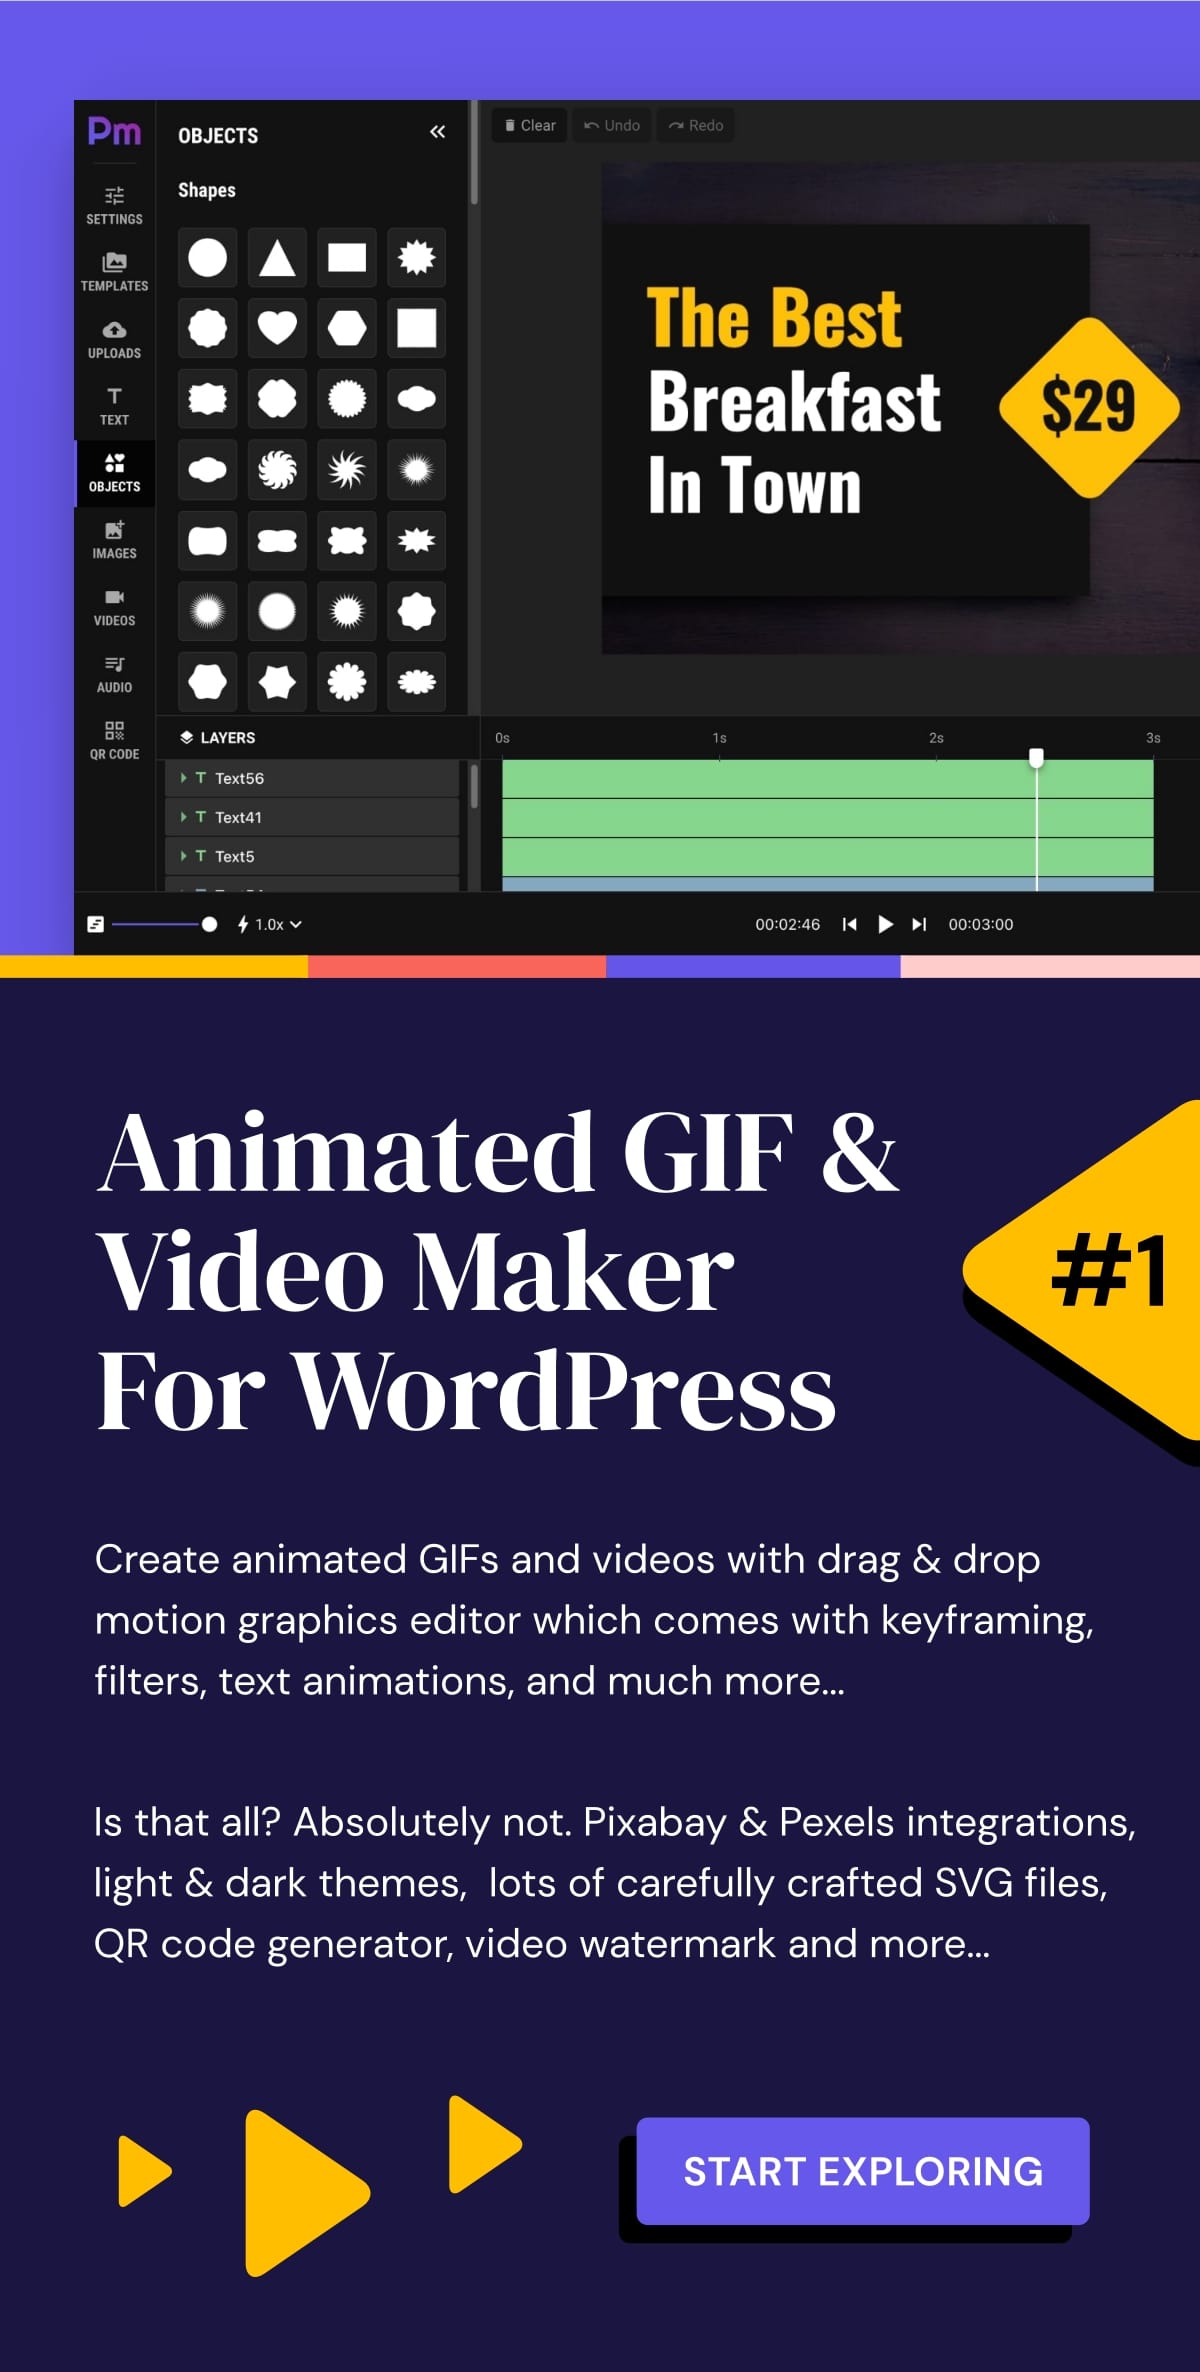 Pmotion - Animated GIF and Video Maker For WordPress